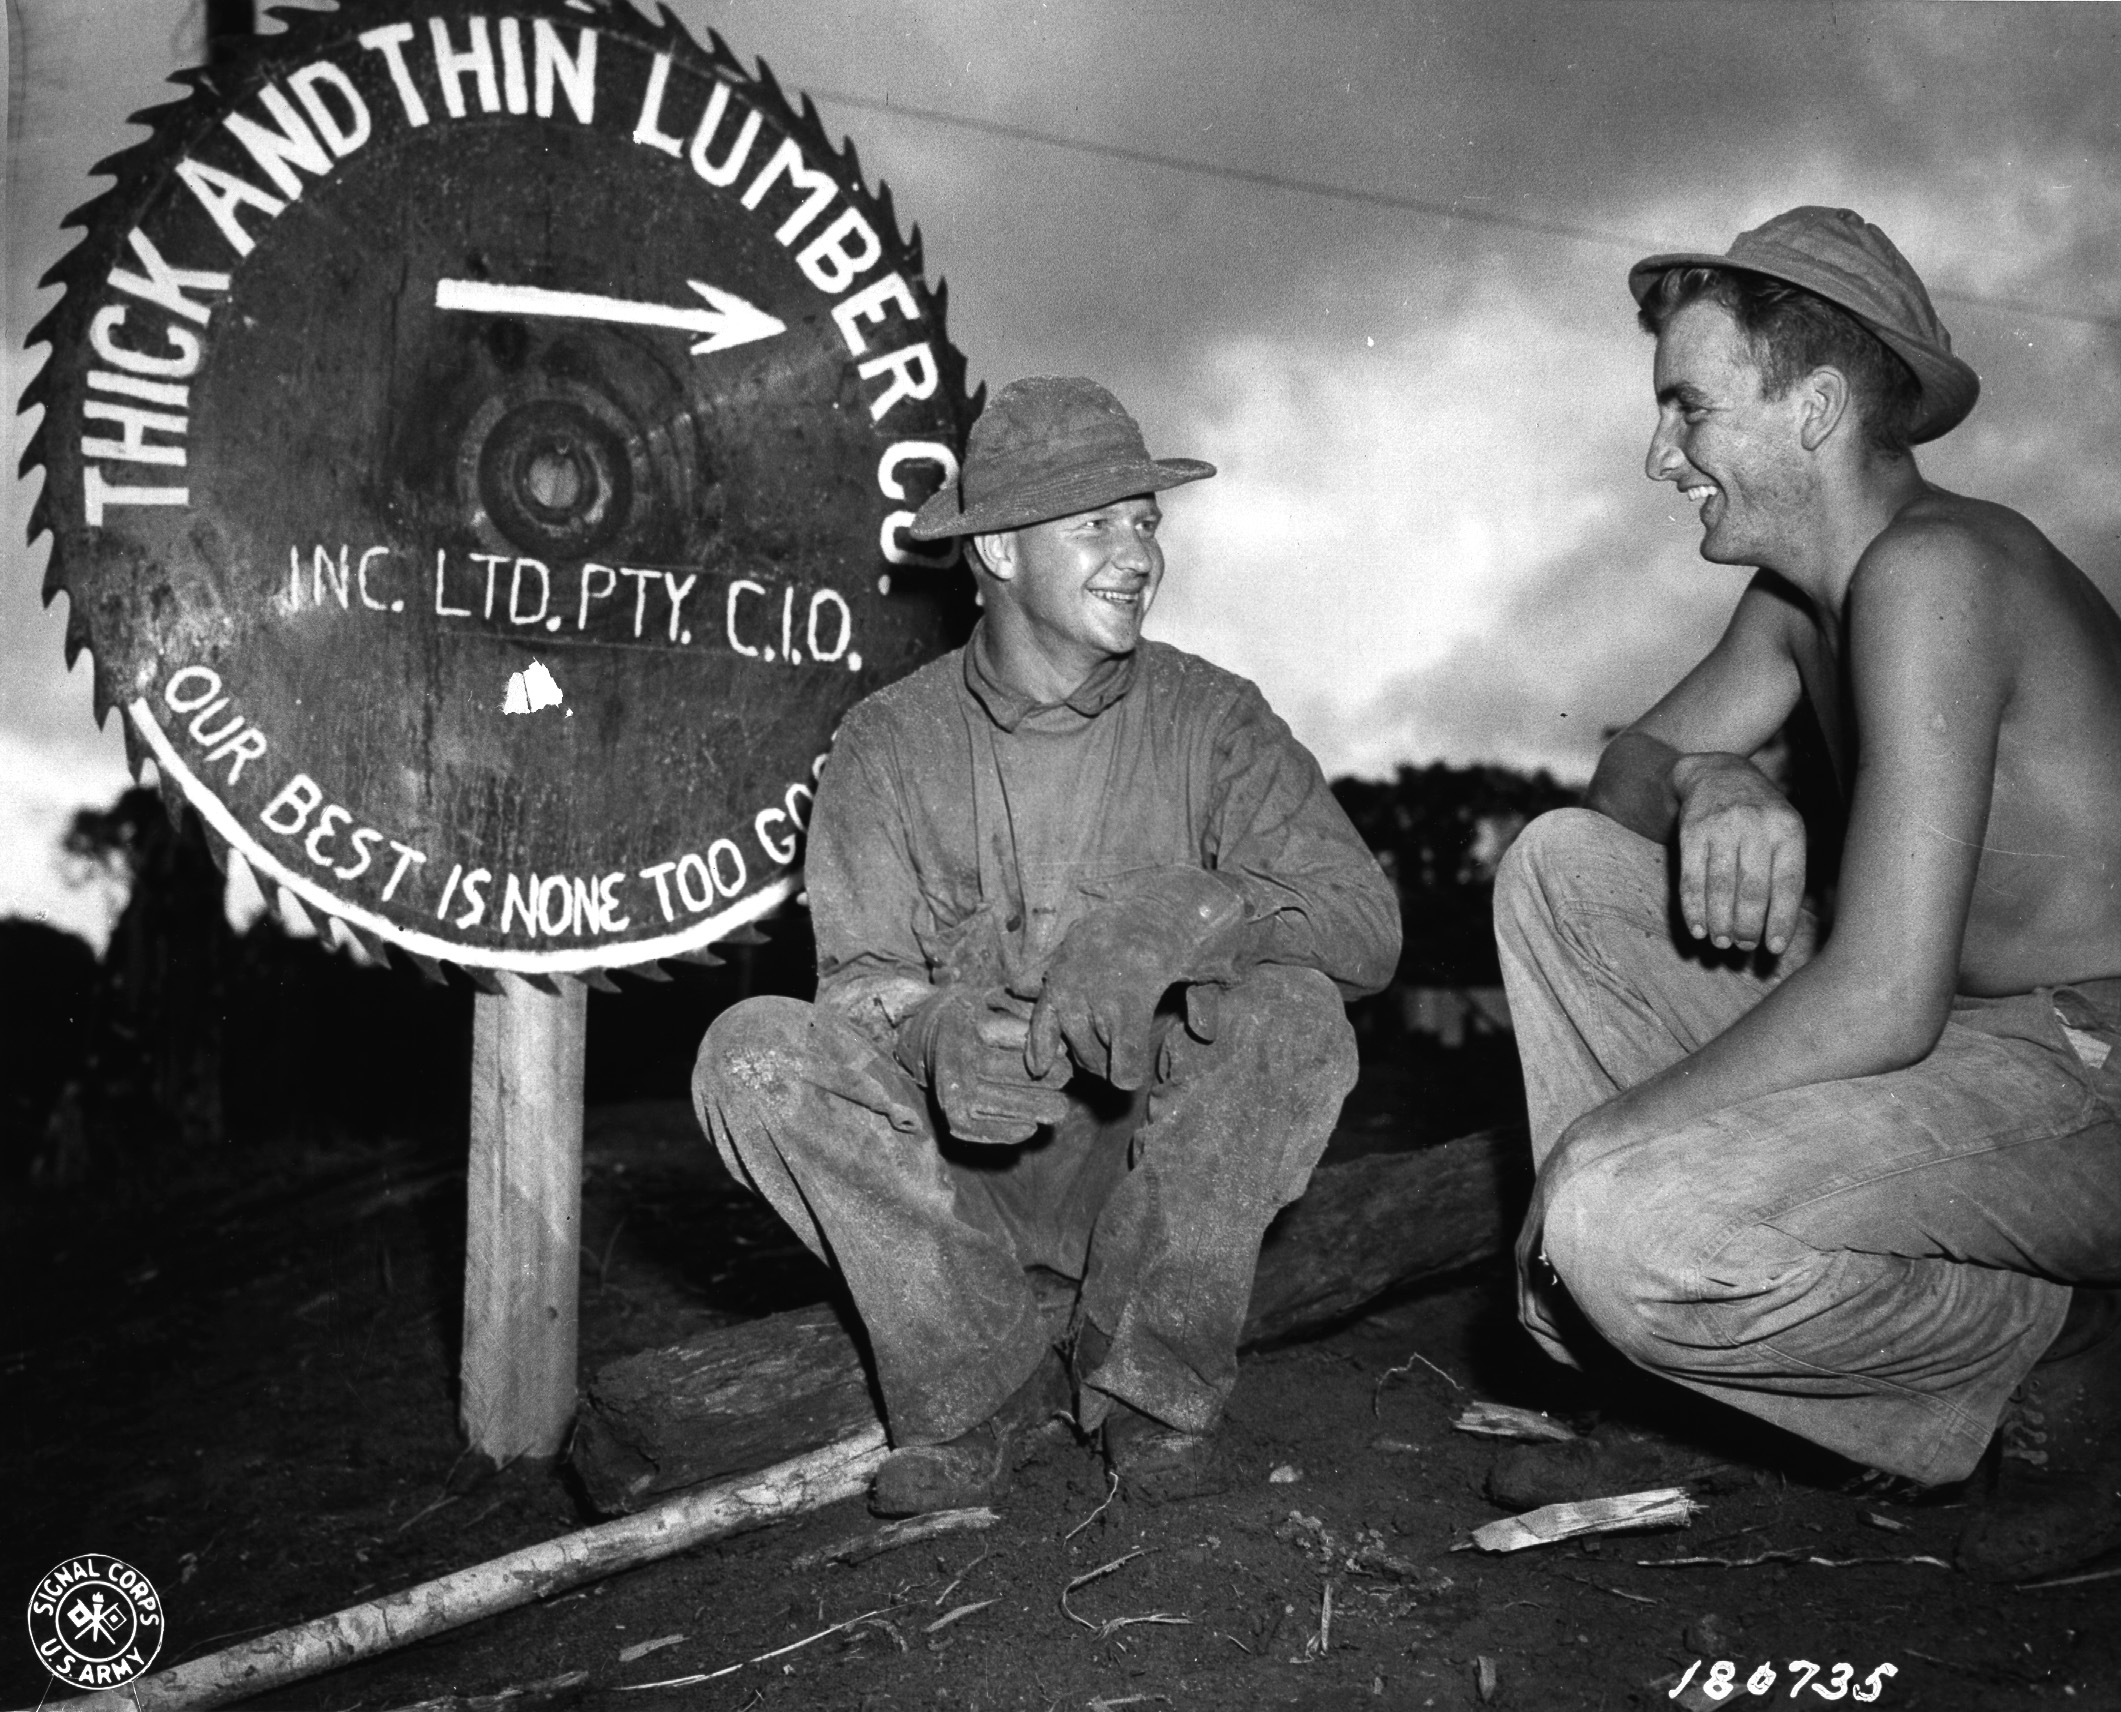 US Army Private Arthur Ristinen and Private First Class John Weinzinger of 186th Regiment, 41st Infantry Division relaxing in front of Warisota Plantation, New Guinea, 5 May 1943